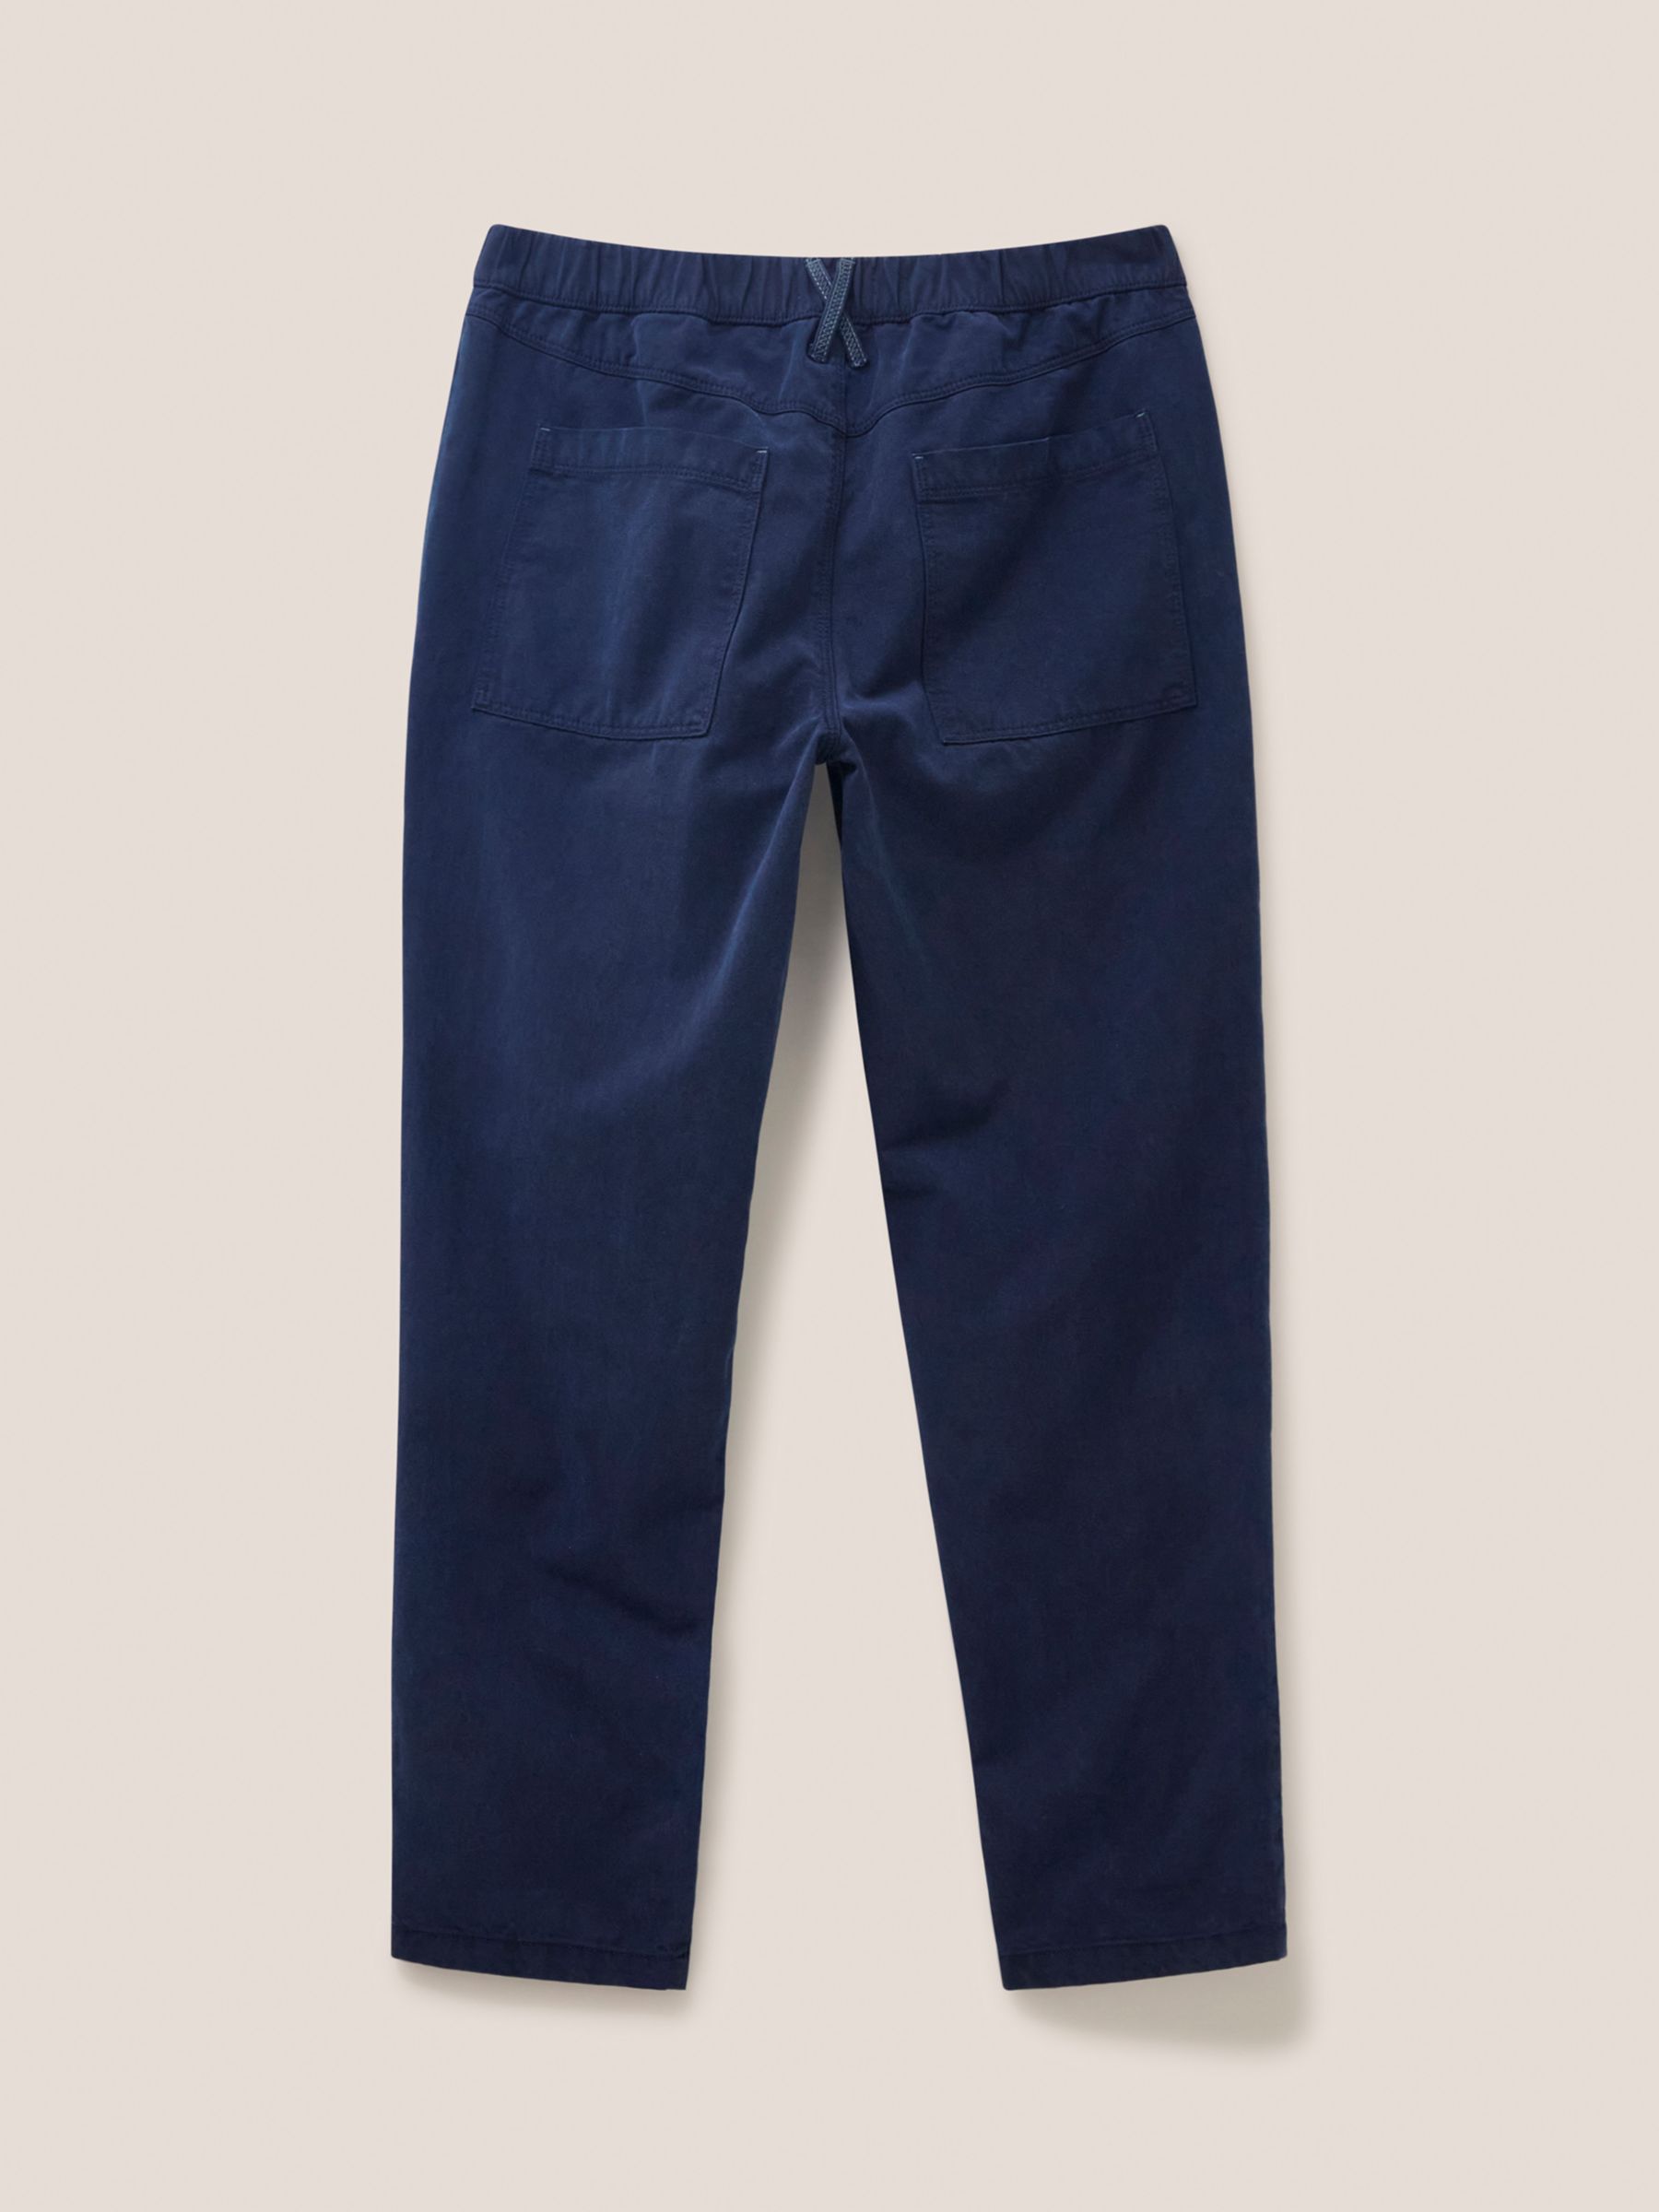 Buy White Stuff Thea Cotton Blend Chinos Online at johnlewis.com